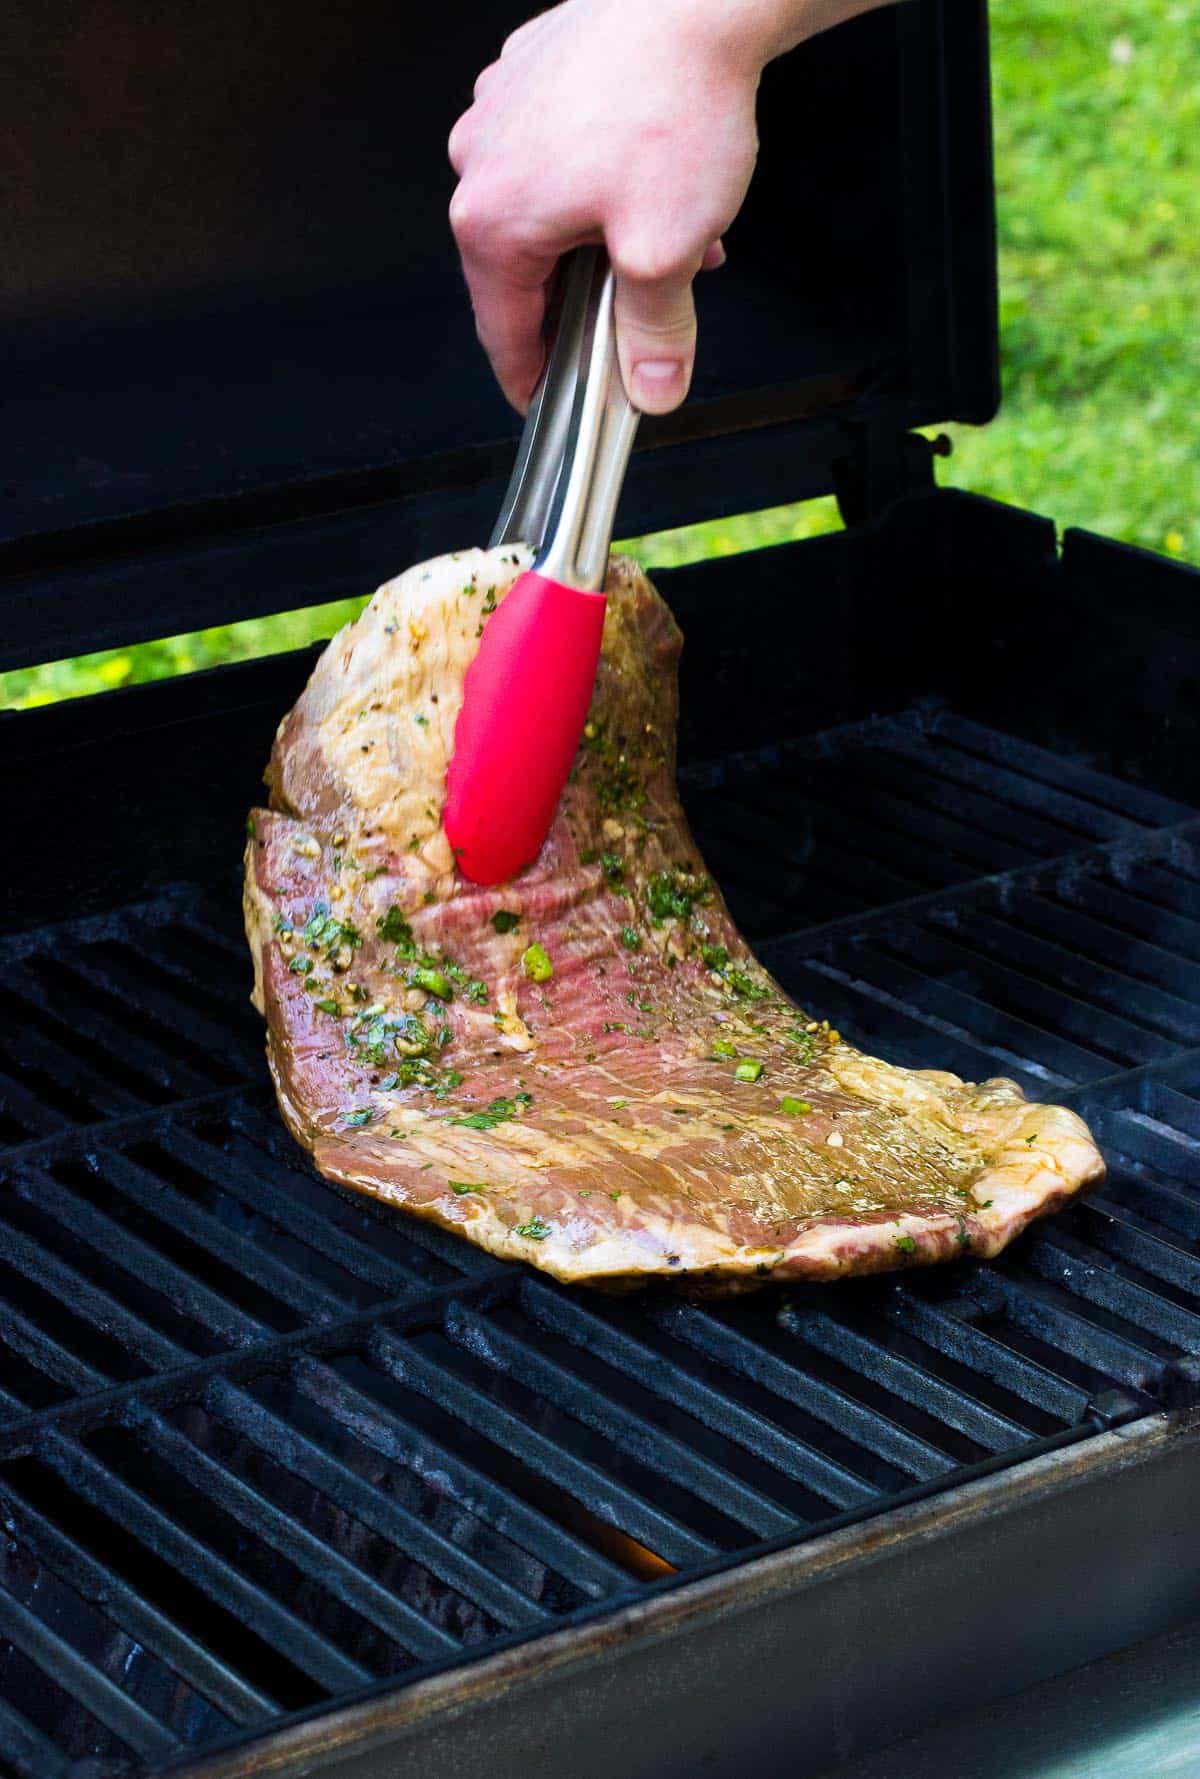 A raw slab of steak being laid on the grill with tongs.